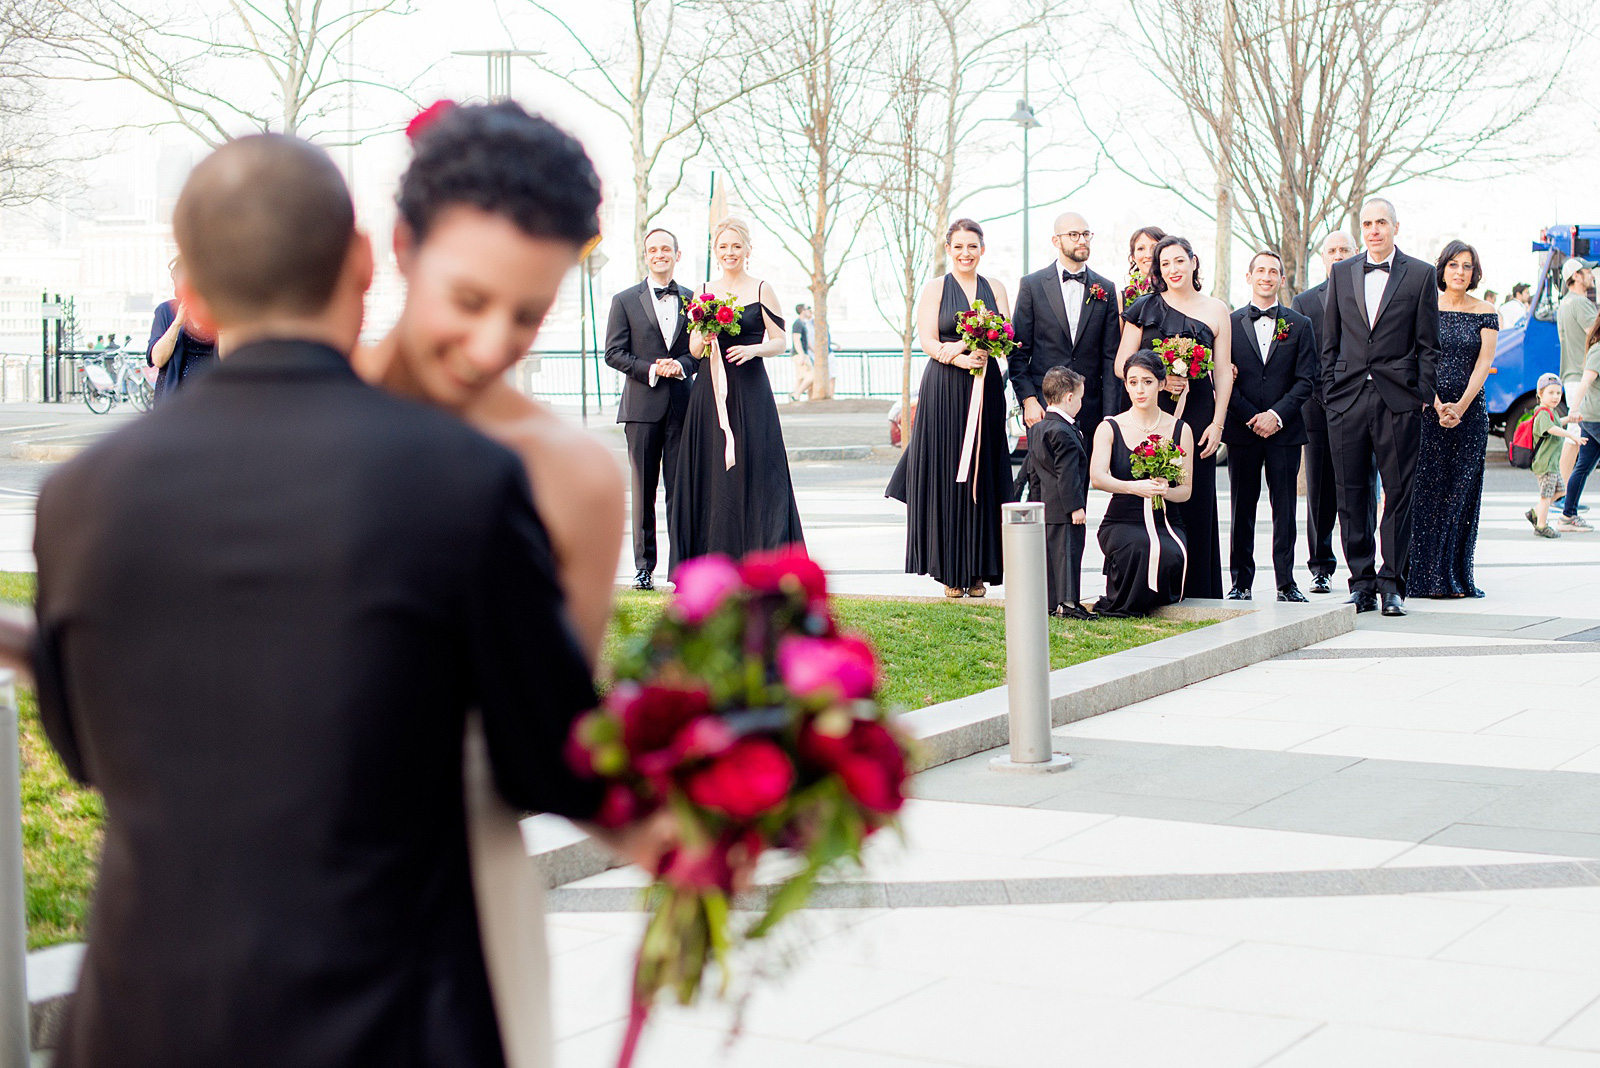 W Hoboken wedding photos by Mikkel Paige Photography at this NJ venue. Pictures in this well known New Jersey city with a view of the NYC skyline. The bride and the groom wore romantic colors including burgundy, fuchsia, red and classic black. Flowers by Sachi Rose Design. The bridal party watched the first look from a distance. #mikkelpaige #HobokenWedding #NewJerseyPhotographer #NewYorkCityPhotographer #NYCweddingphotographer #brideandgroomphotos #redpeonies #romanticwedding #springwedding #CityWedding